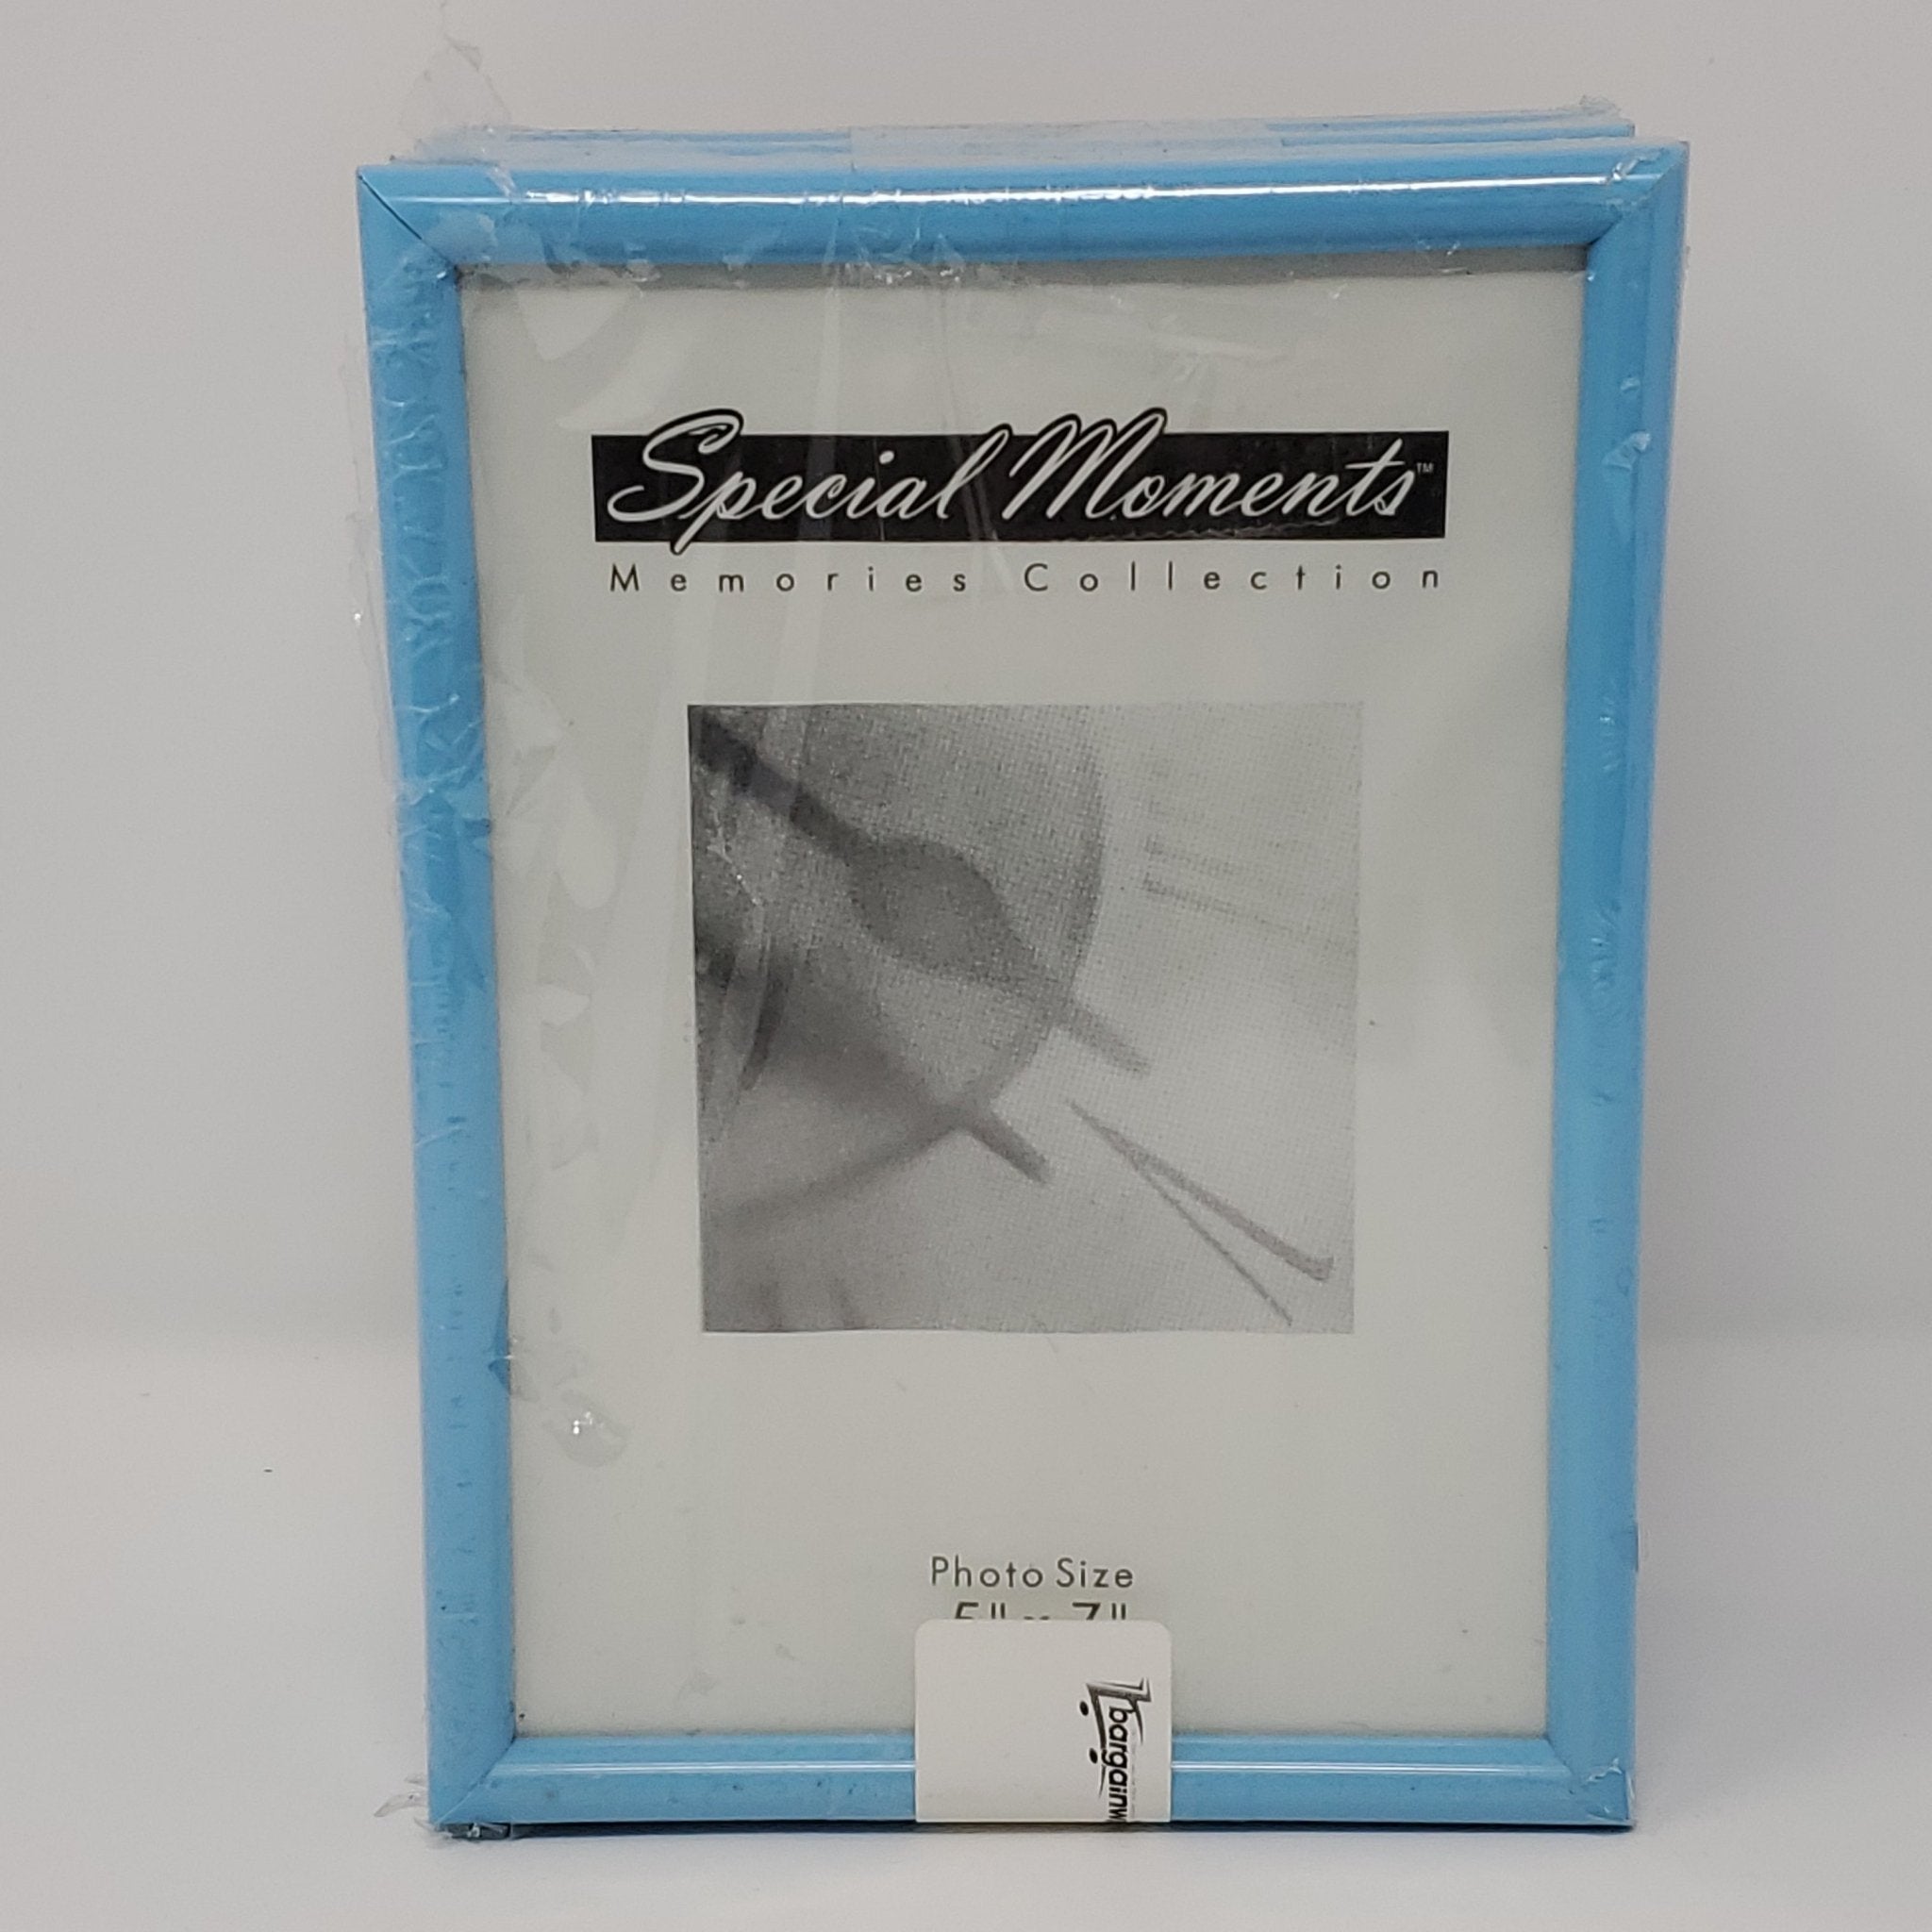 Picture Frame - 5" x 7" - Bargainwizz